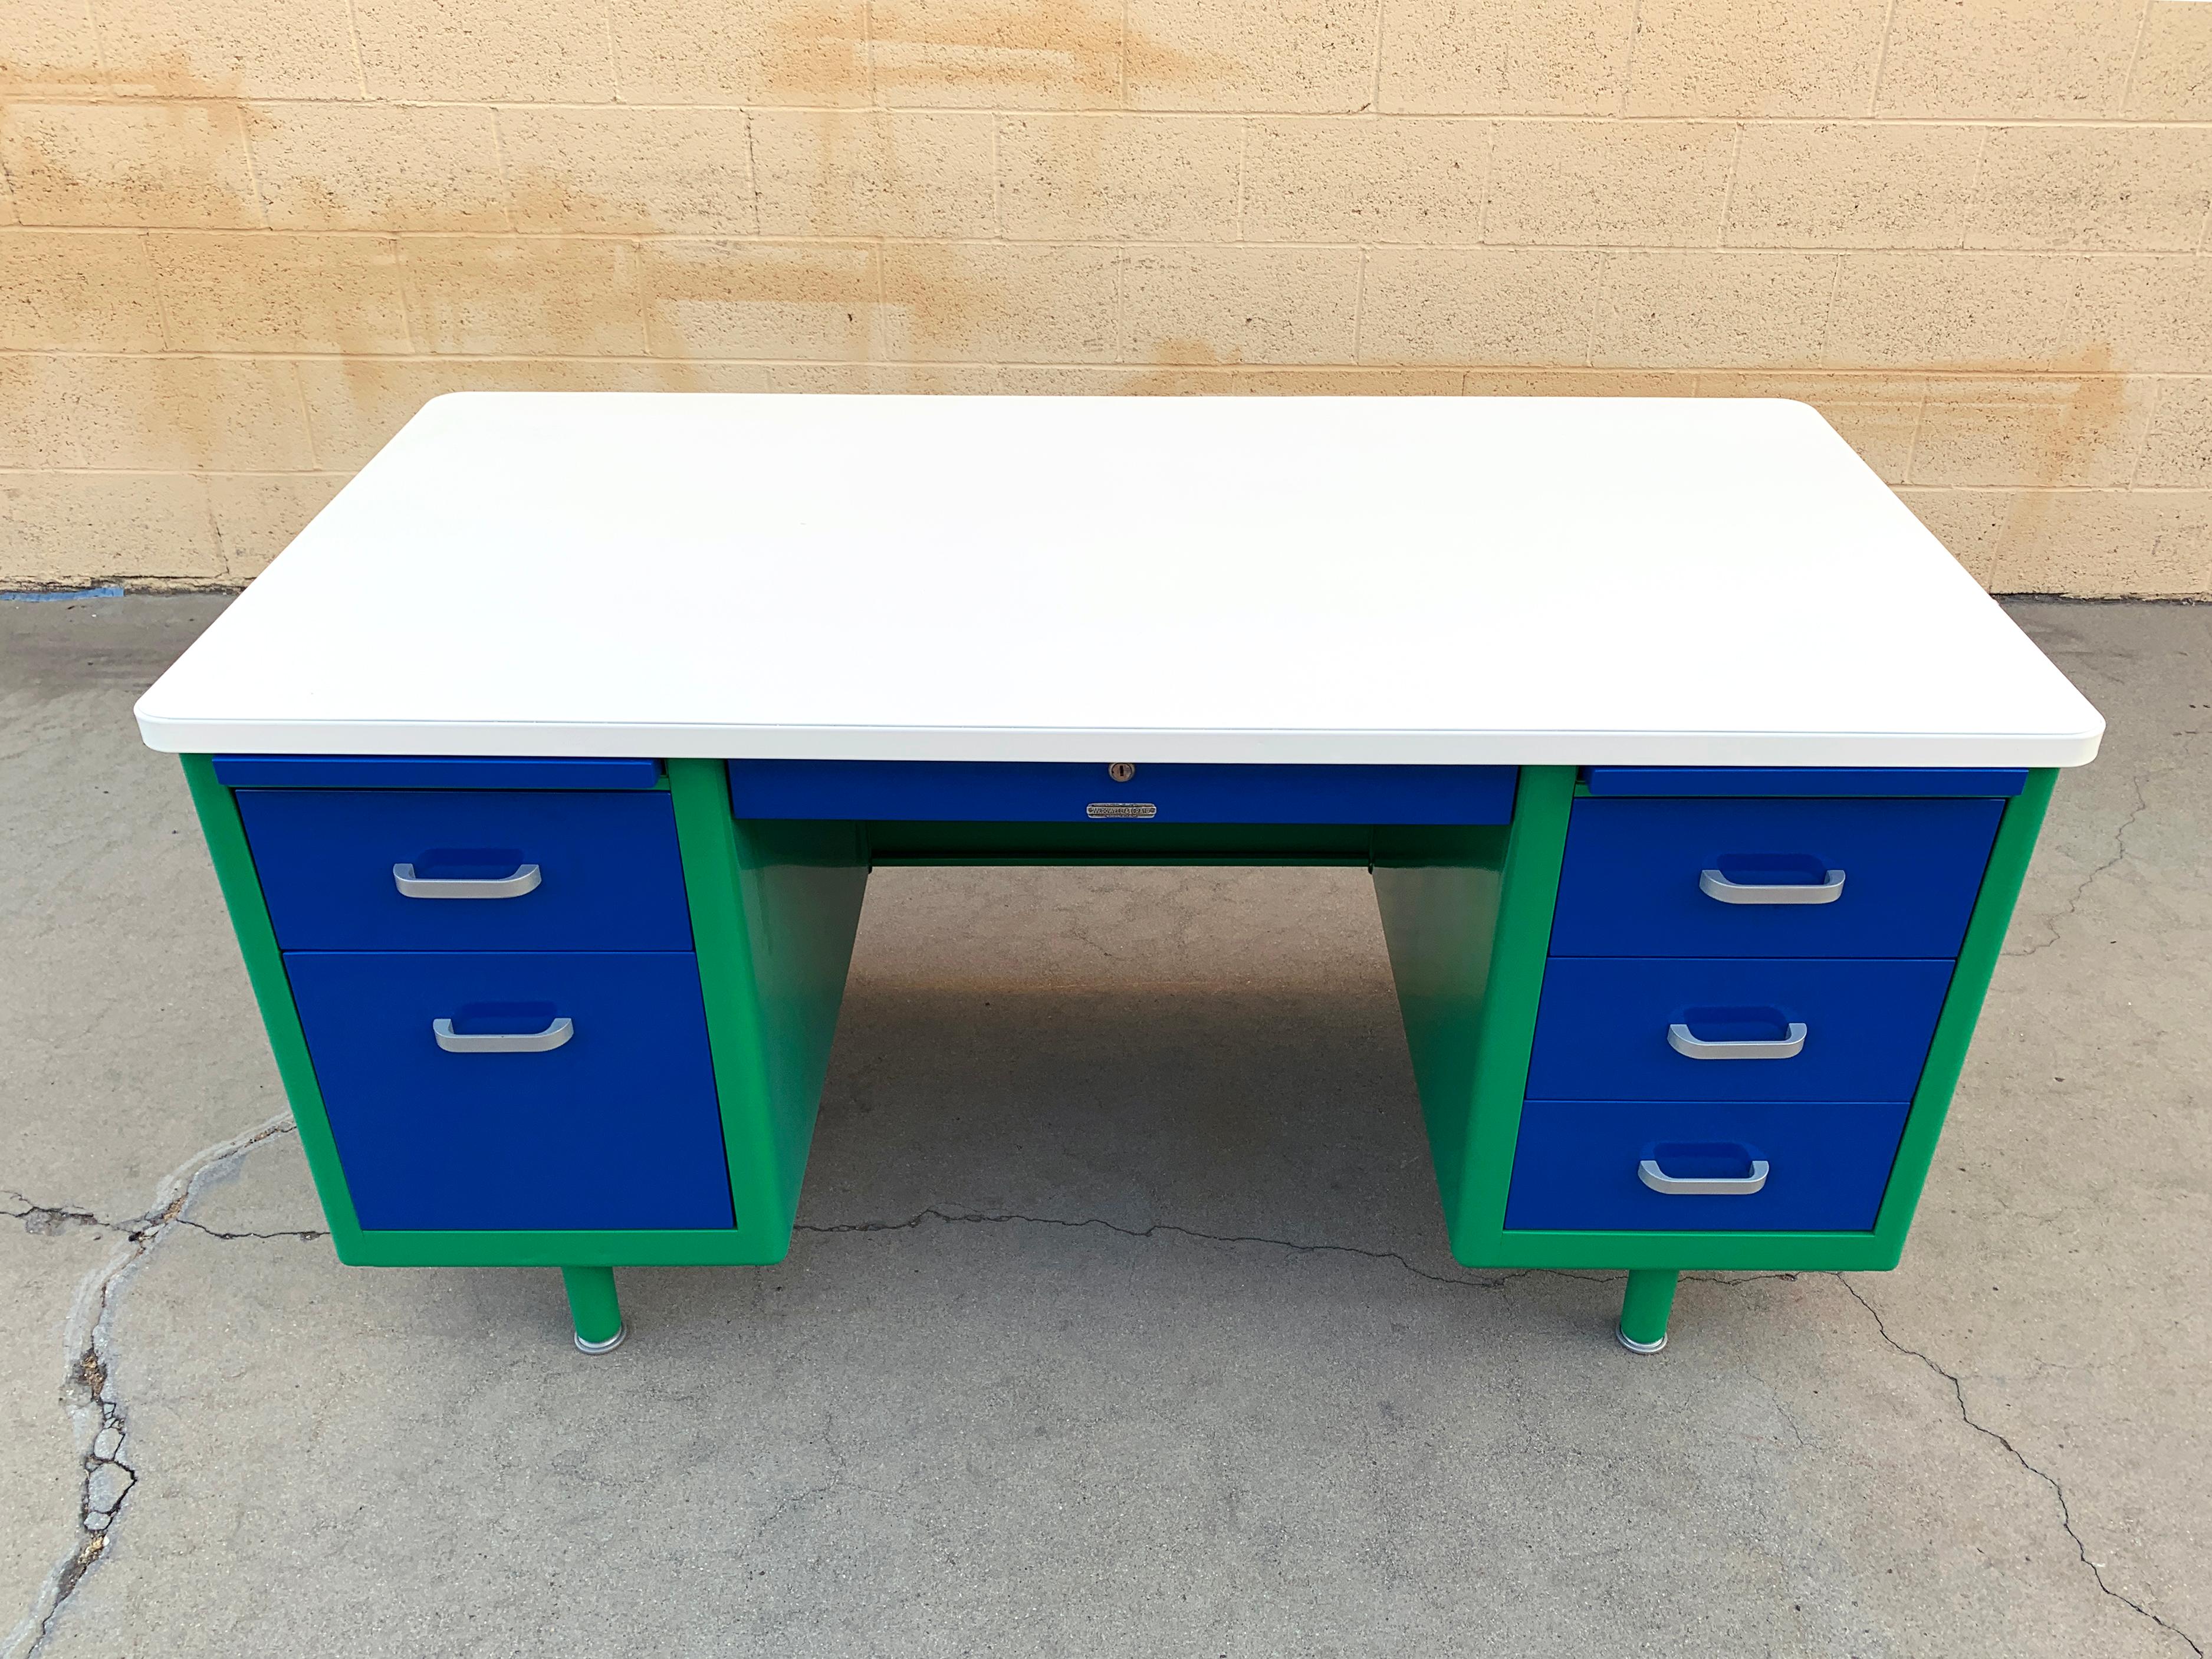 In stock and ready to ship!

Classic 1960s McDowell Craig tanker desk refinished in a playful Bauhaus-inspired color combination of green and blue with a while top. 

This Classic double pedestal desk features many utility drawers, one filing